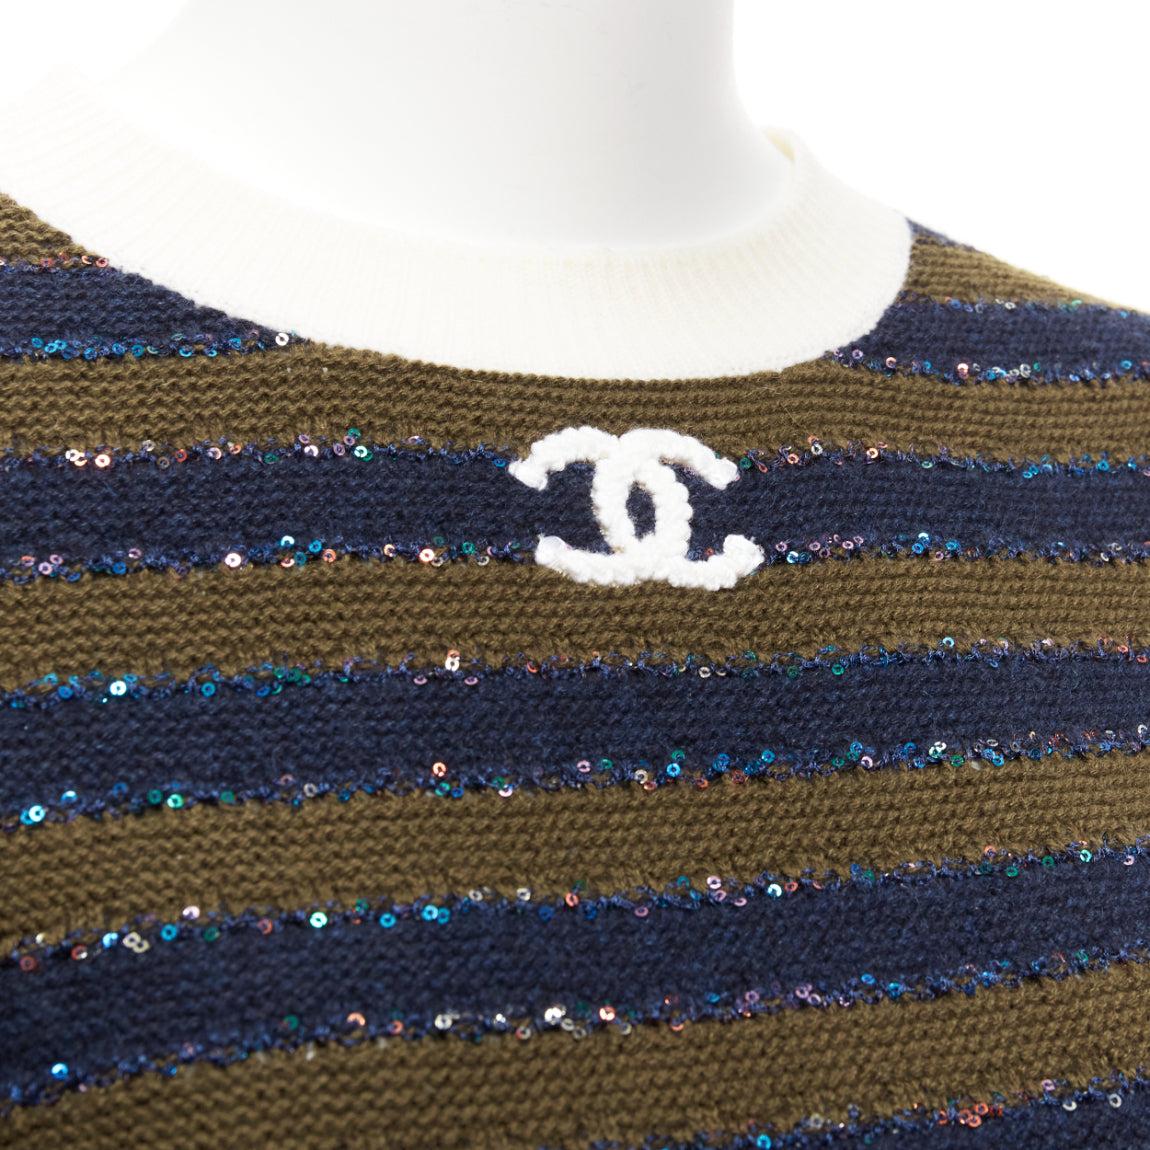 CHANEL 20C navy khaki sequin cashmere blend CC logo stripe crop sweater FR34 XXS
Reference: AAWC/A00806
Brand: Chanel
Designer: Virginie Viard
Collection: 20C
Material: Cashmere, Blend
Color: Navy, Khaki
Pattern: Solid
Closure: Slip On
Extra